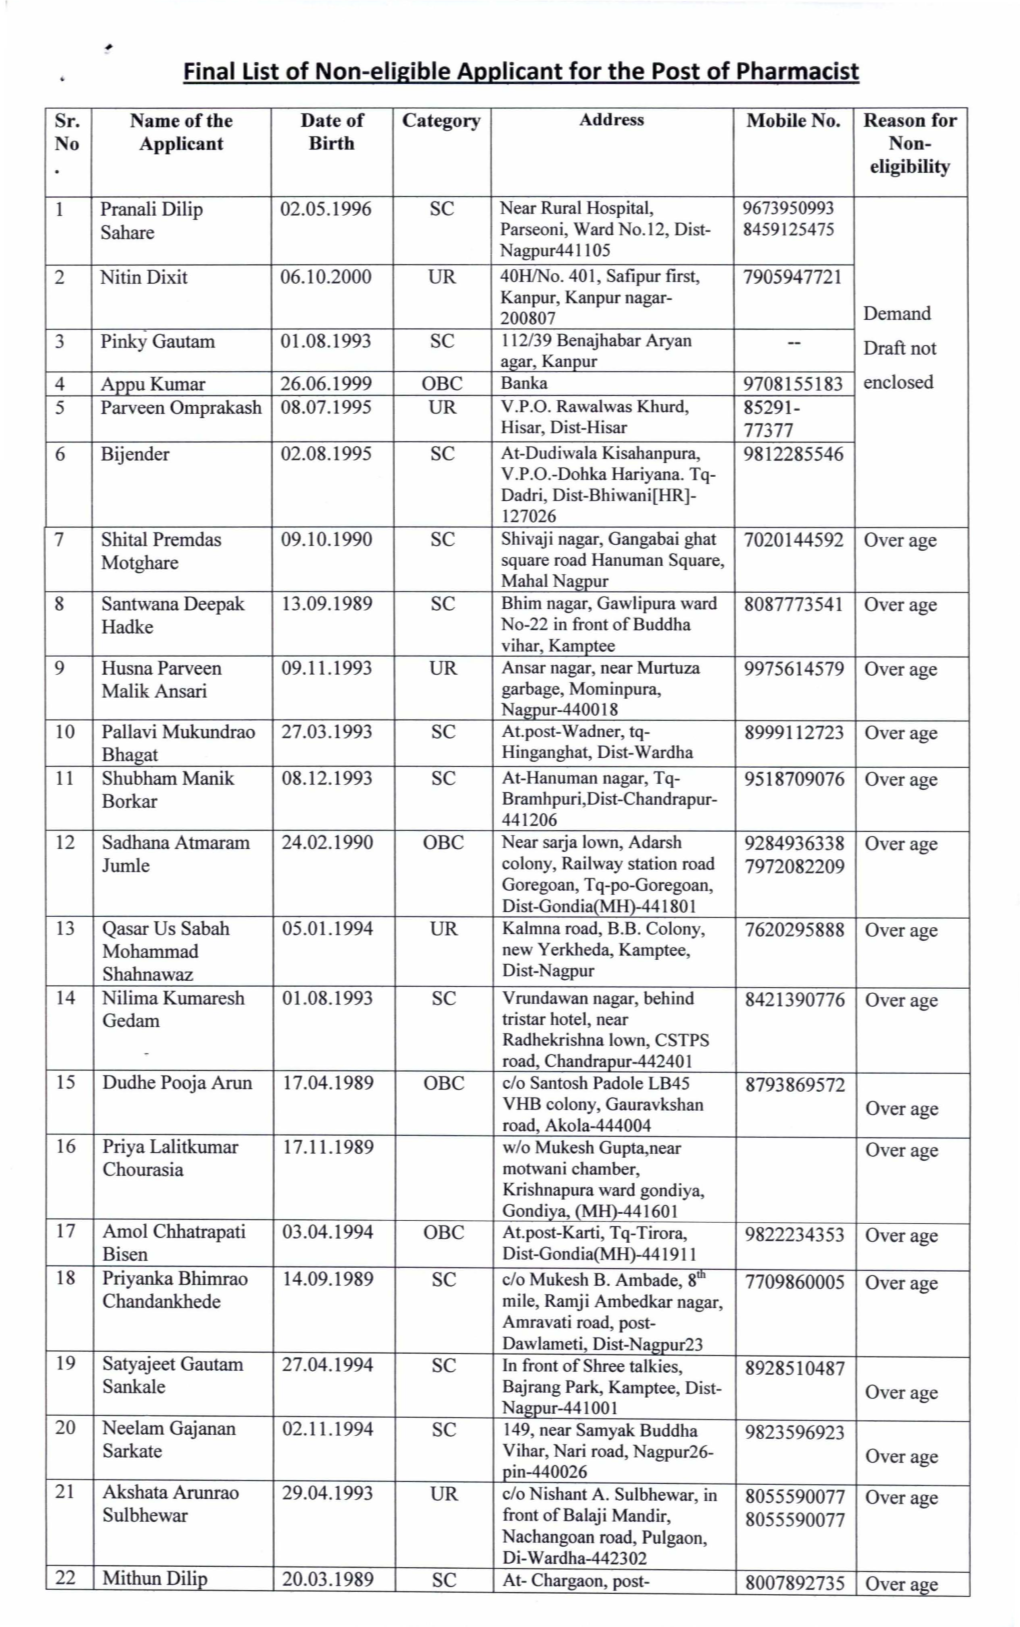 Final List of Non-Eligible Applicant for the Post of Pharmacist